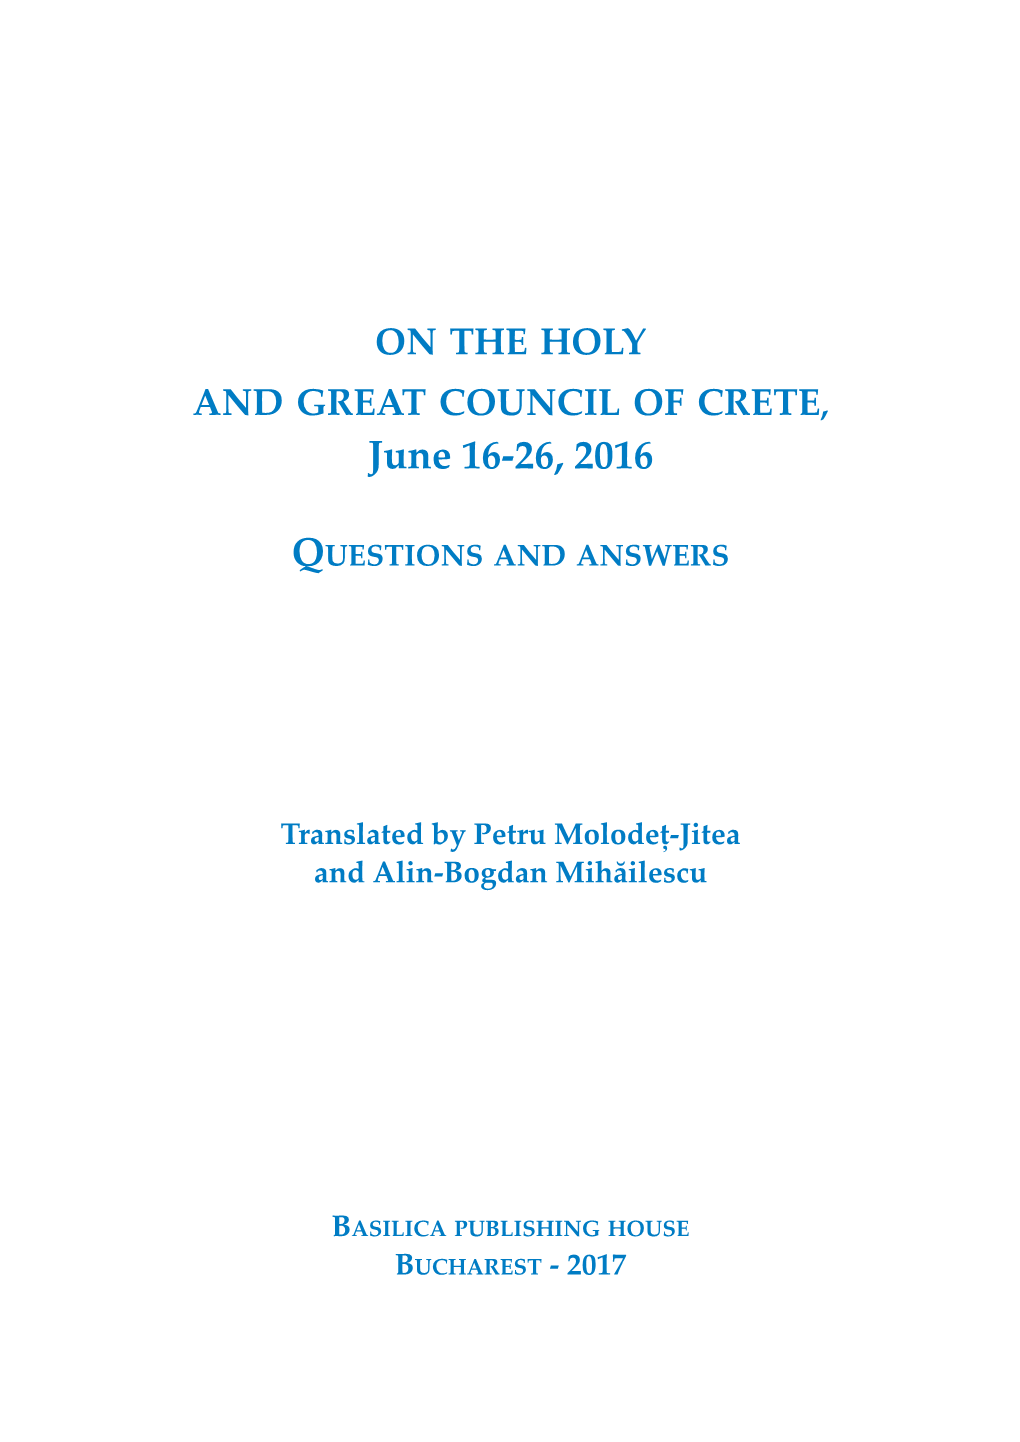 On the Holy and Great Council of Crete